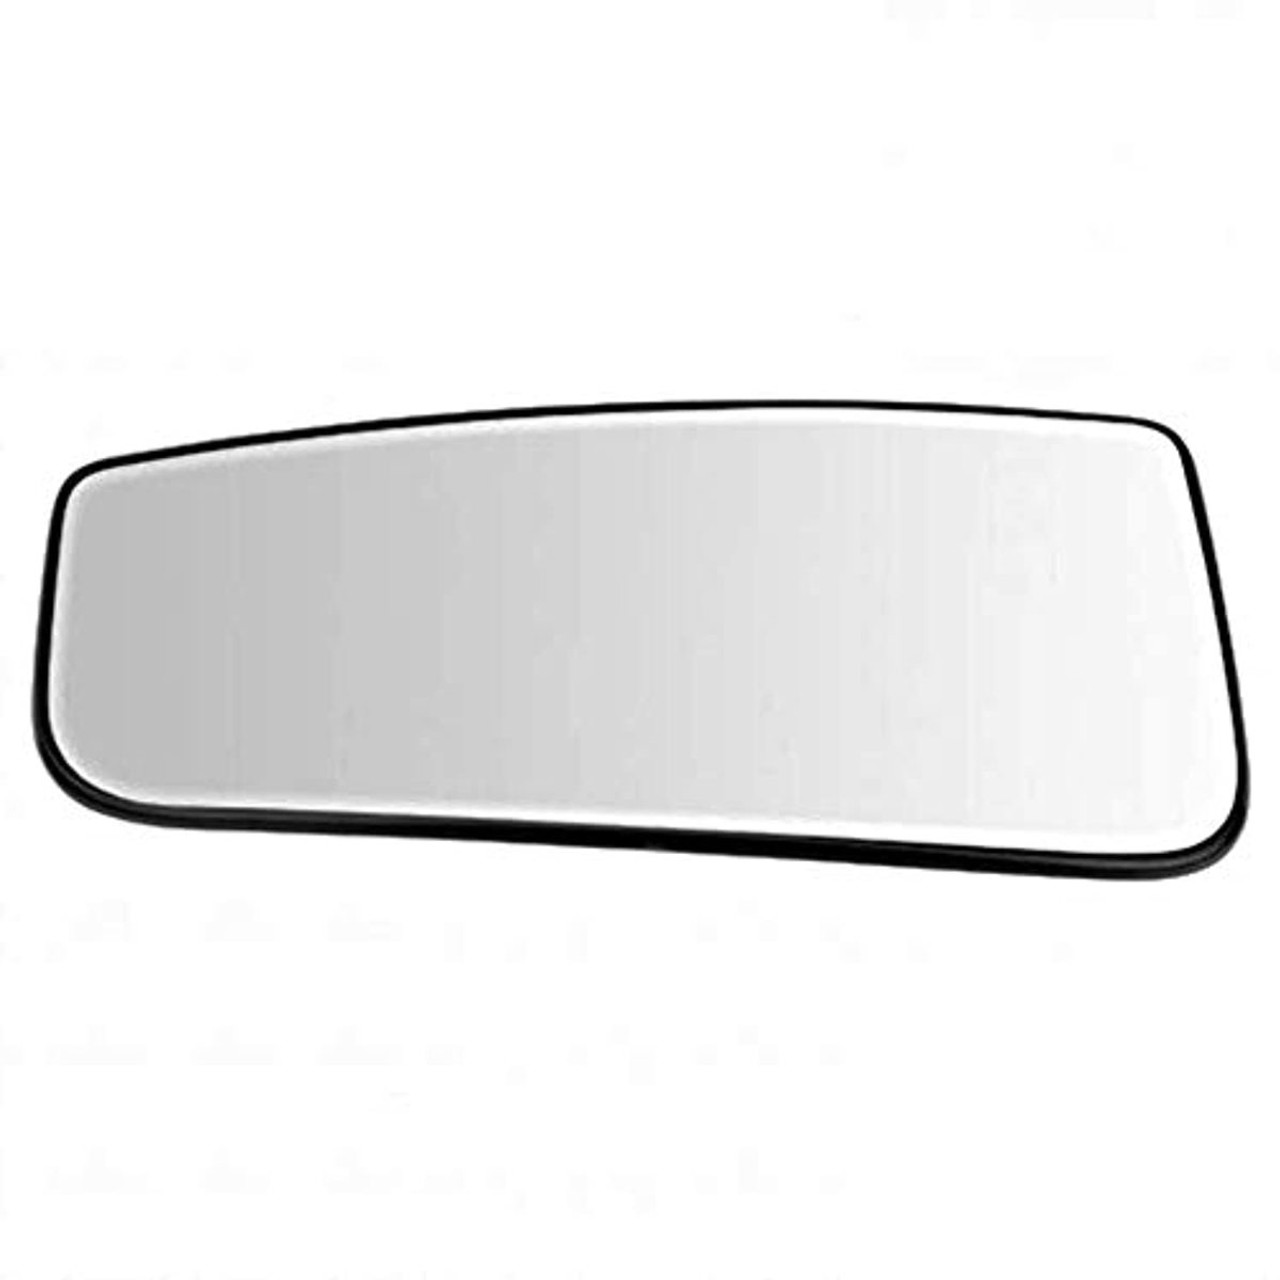 Left Driver Lower Convex Tow Mirror 84Glass w/Holder OE For 15-18 F150, 17-20 F250 F350 F450 Manual